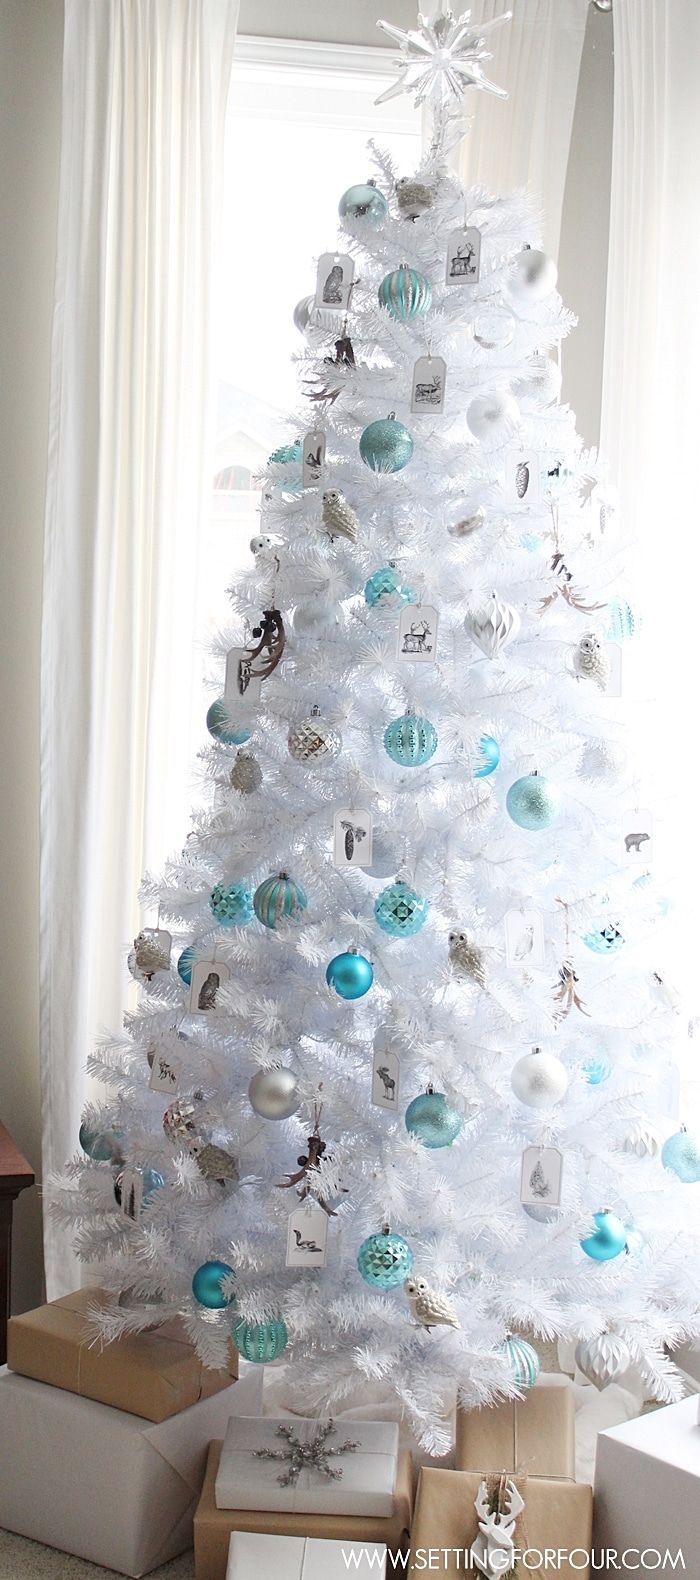 Decorate a white Christmas tree in any number of ways.